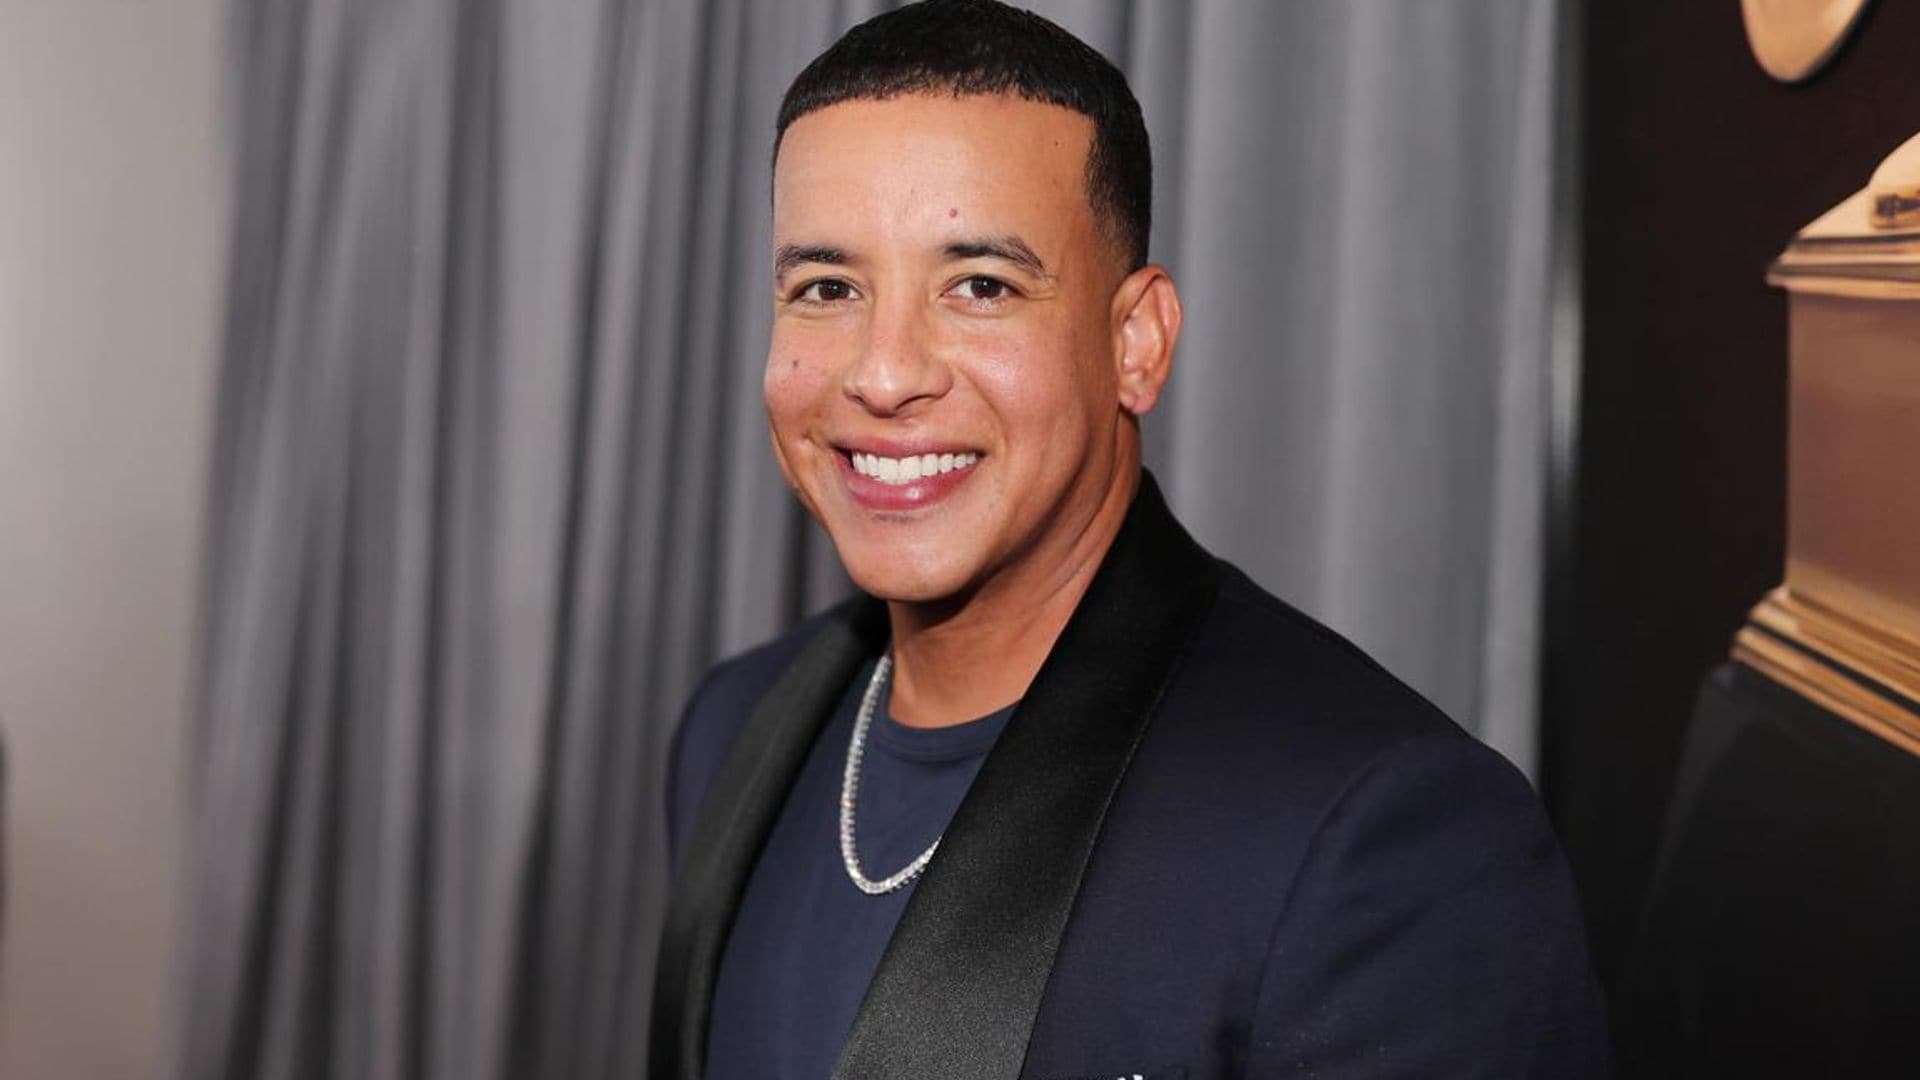 There's a Daddy Yankee museum opening in Puerto Rico